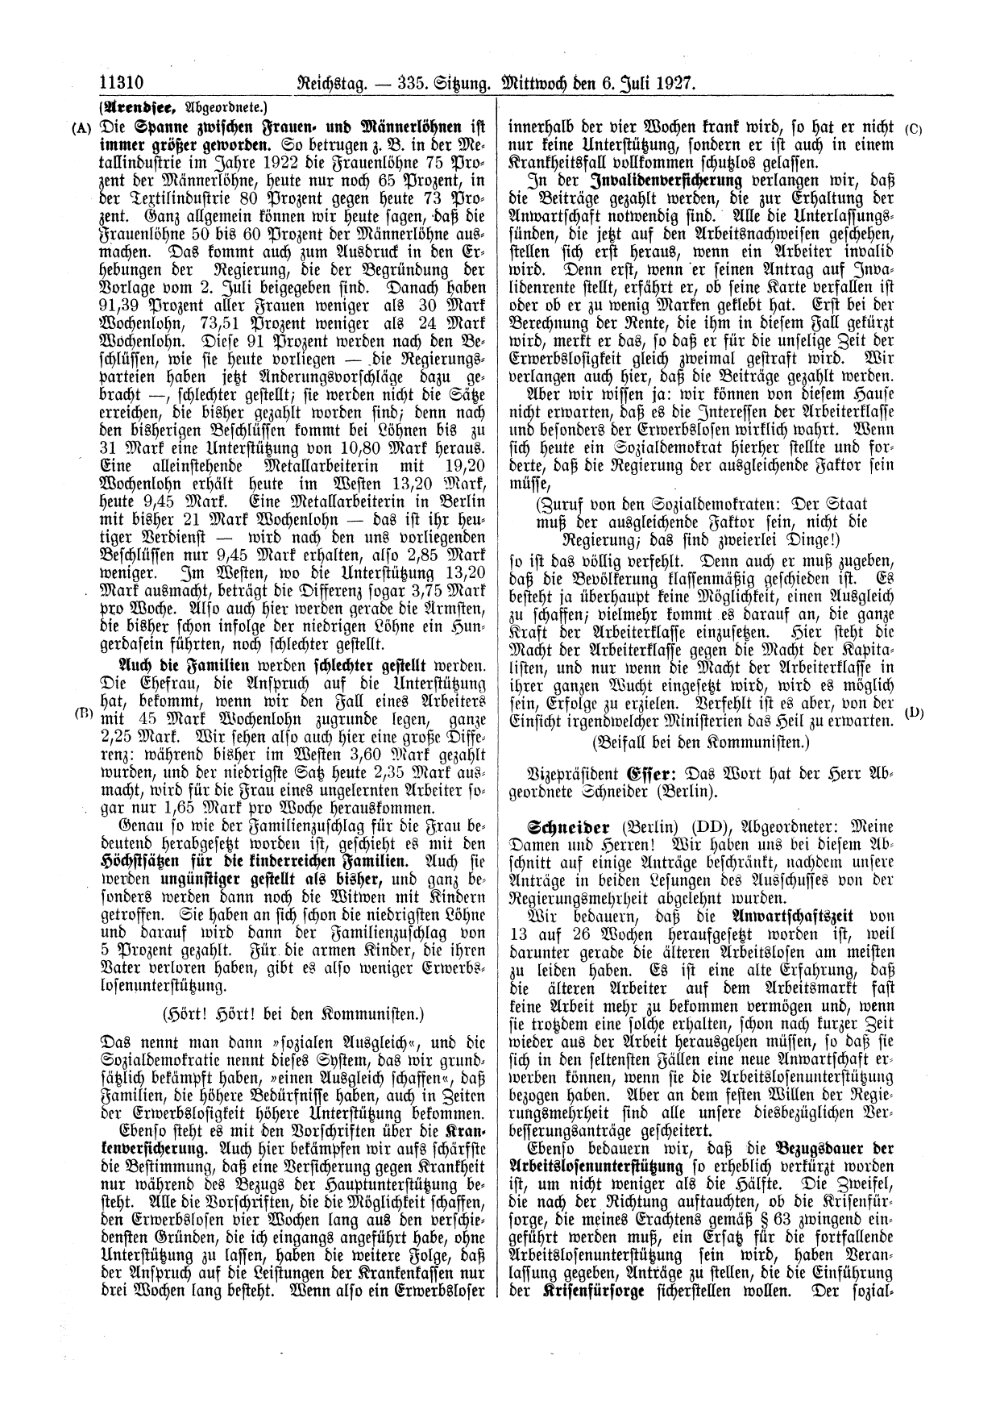 Scan of page 11310